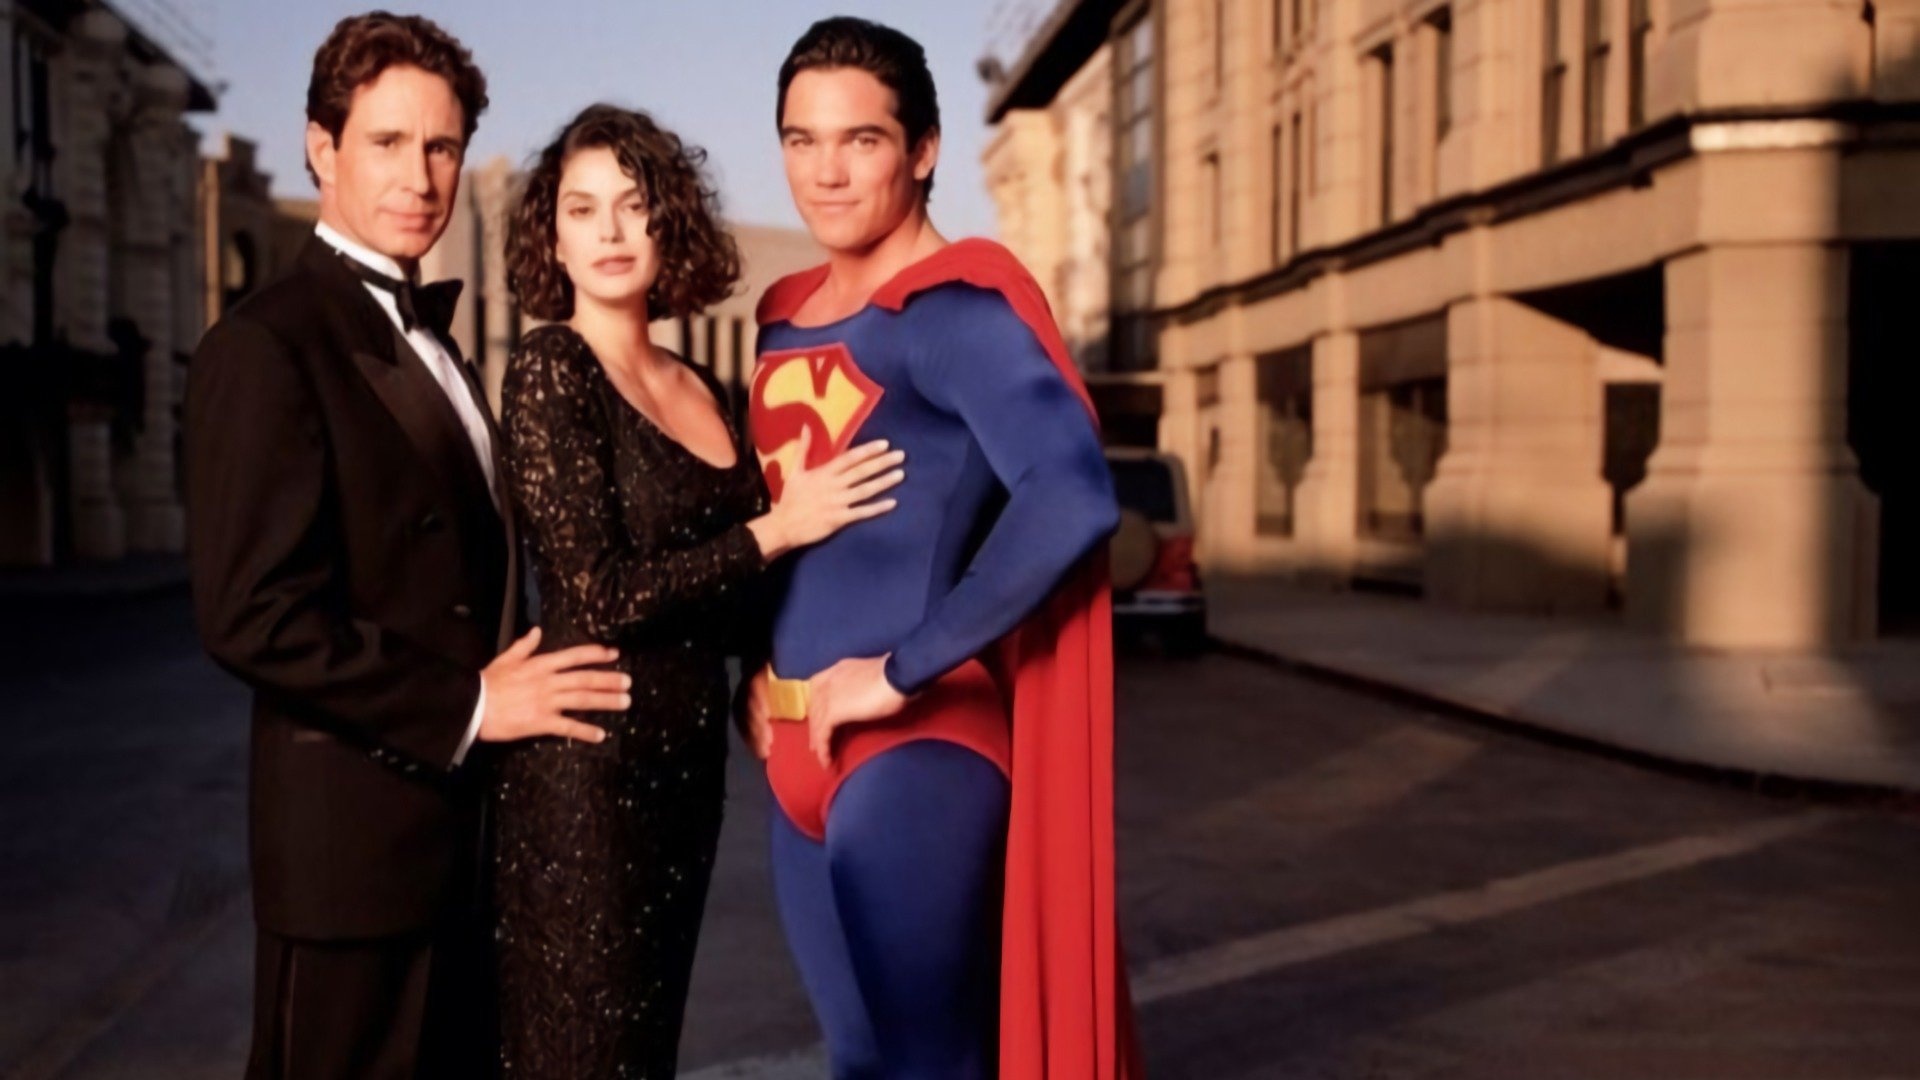 Lois and Clark: The New Adventures of Superman: Three recurring villains made several appearances in the show: Lex Luthor, Intergang agent Bill Church Jr., and Tempus. 1920x1080 Full HD Wallpaper.